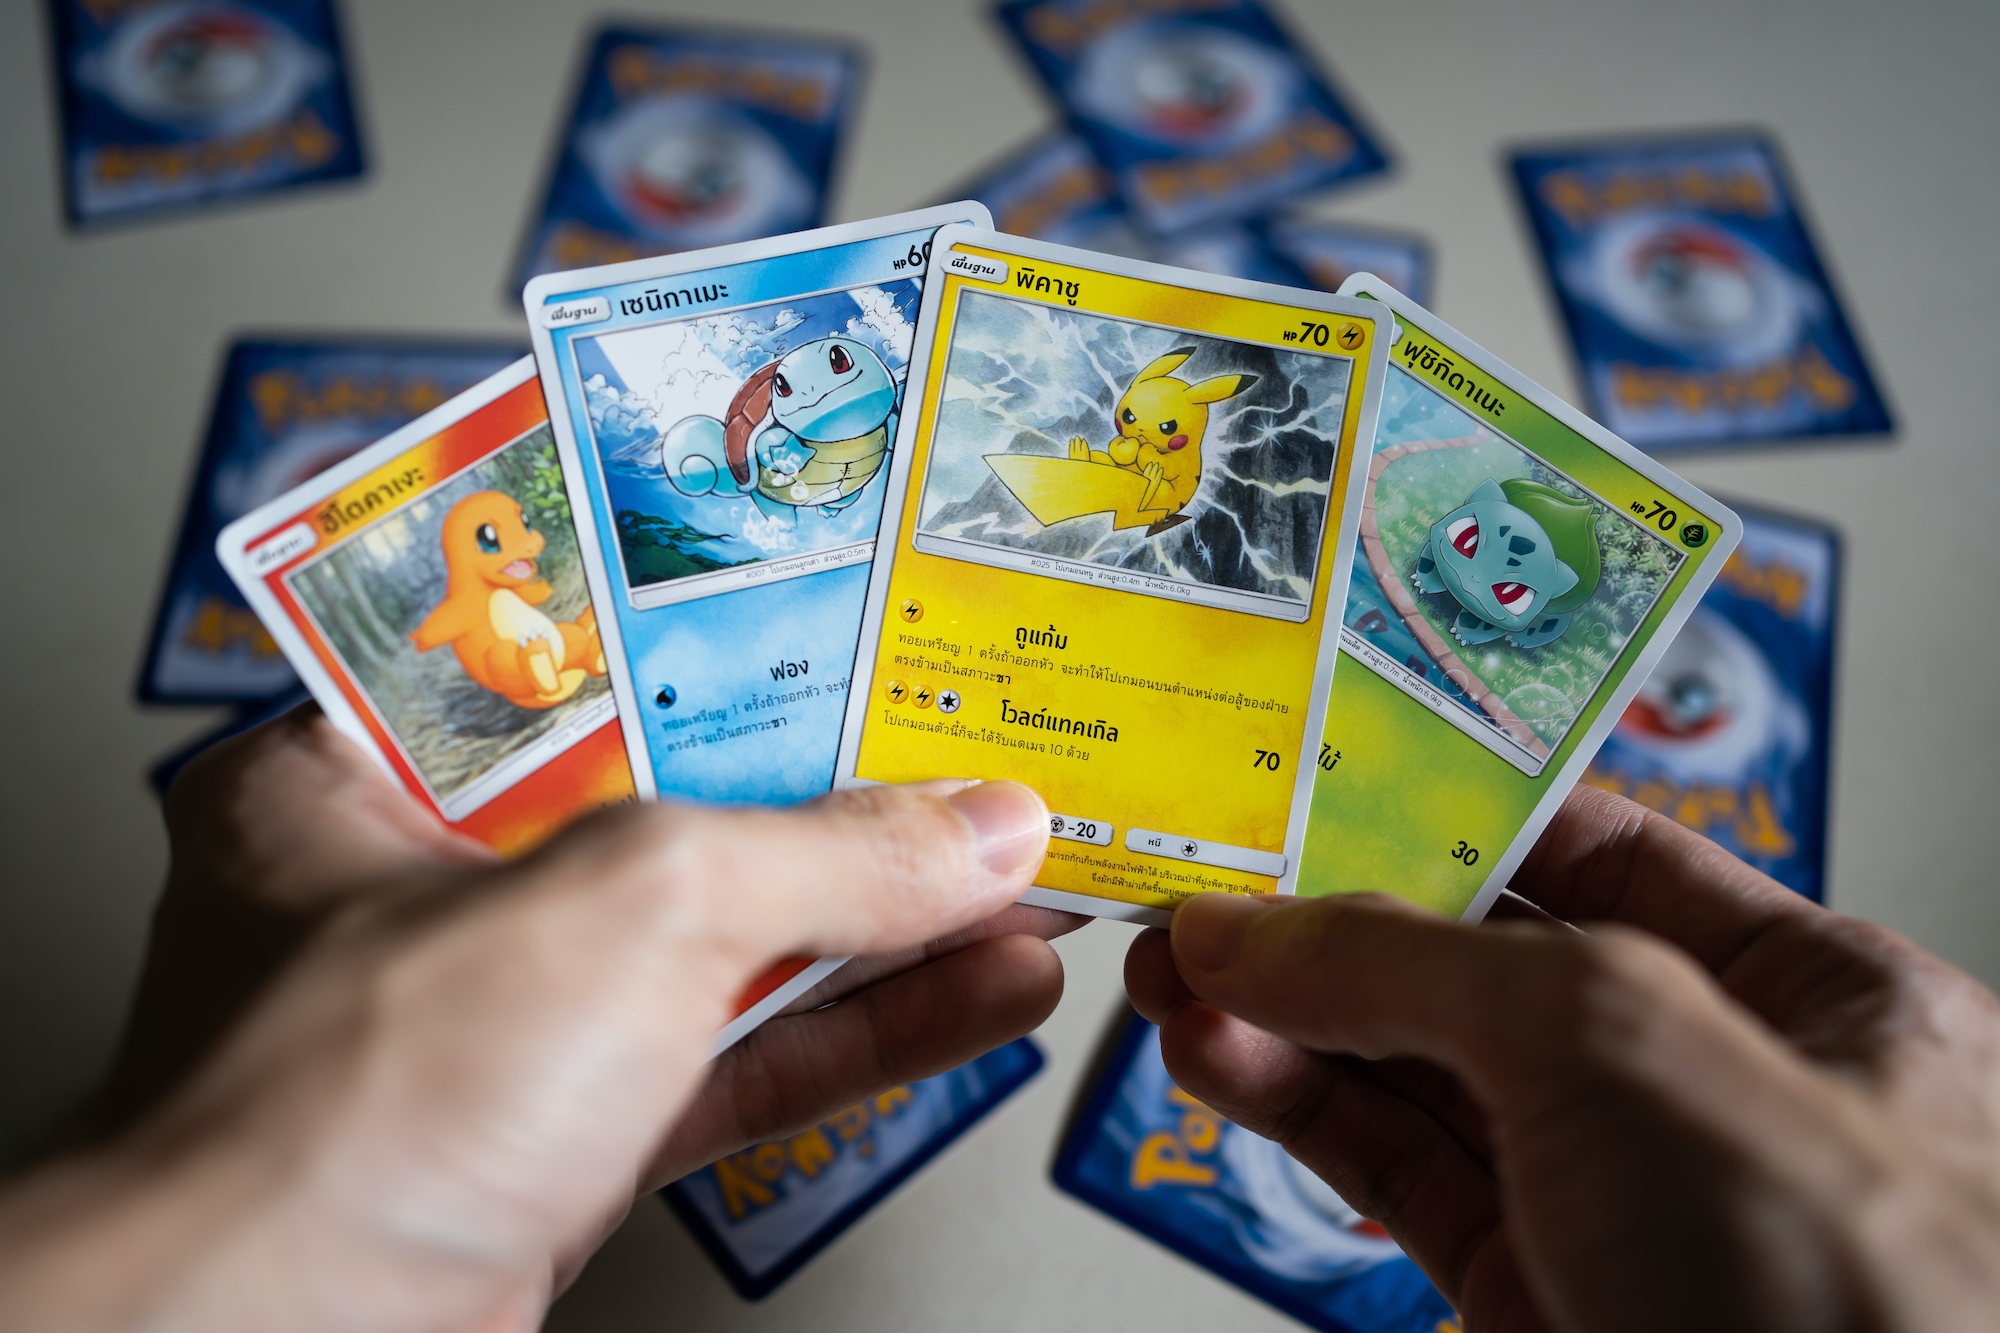 Pokemon cards in hand